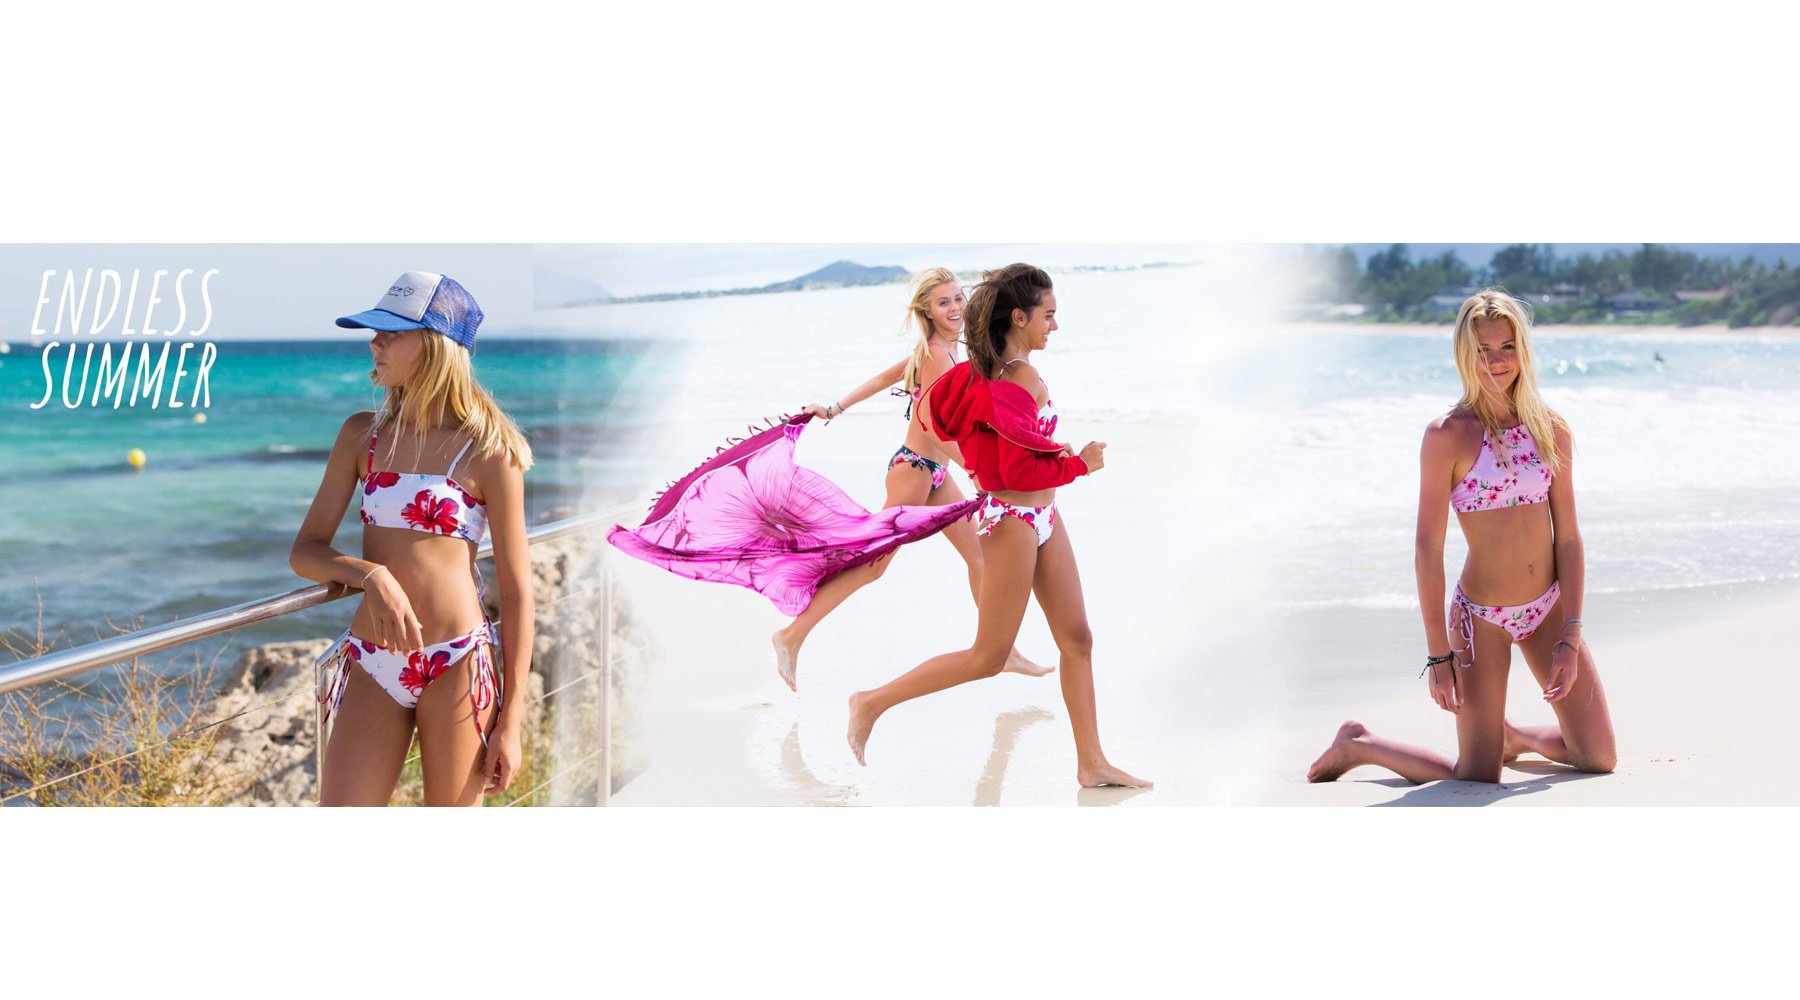 Endless Summer Collection photographed in Spain and Hawaiibeautiful bikinis and 1-pieces for Tween Girls and Teens